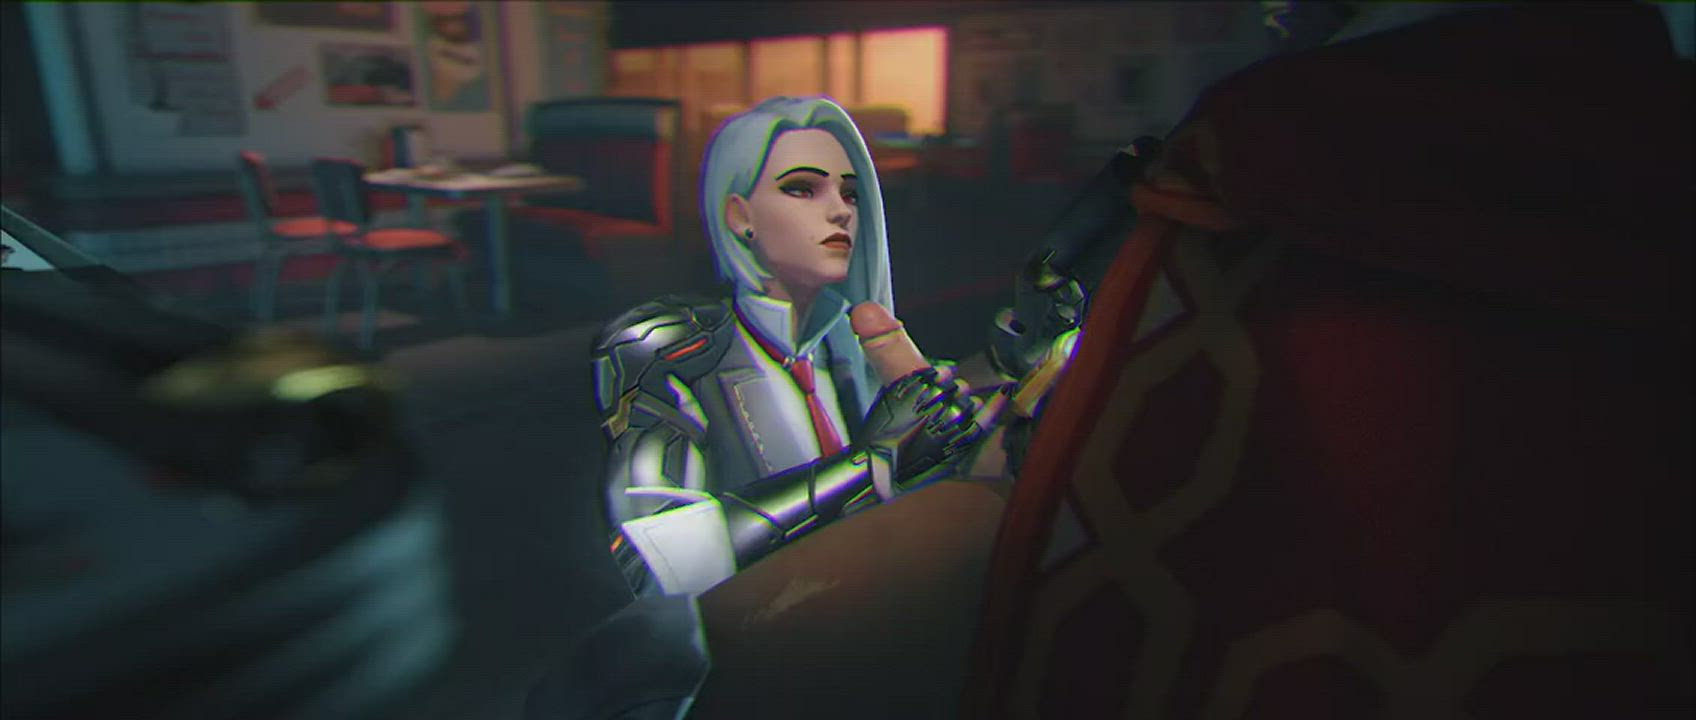 Ashe milking Mccree - animation by (Unknown; If u know tell me)